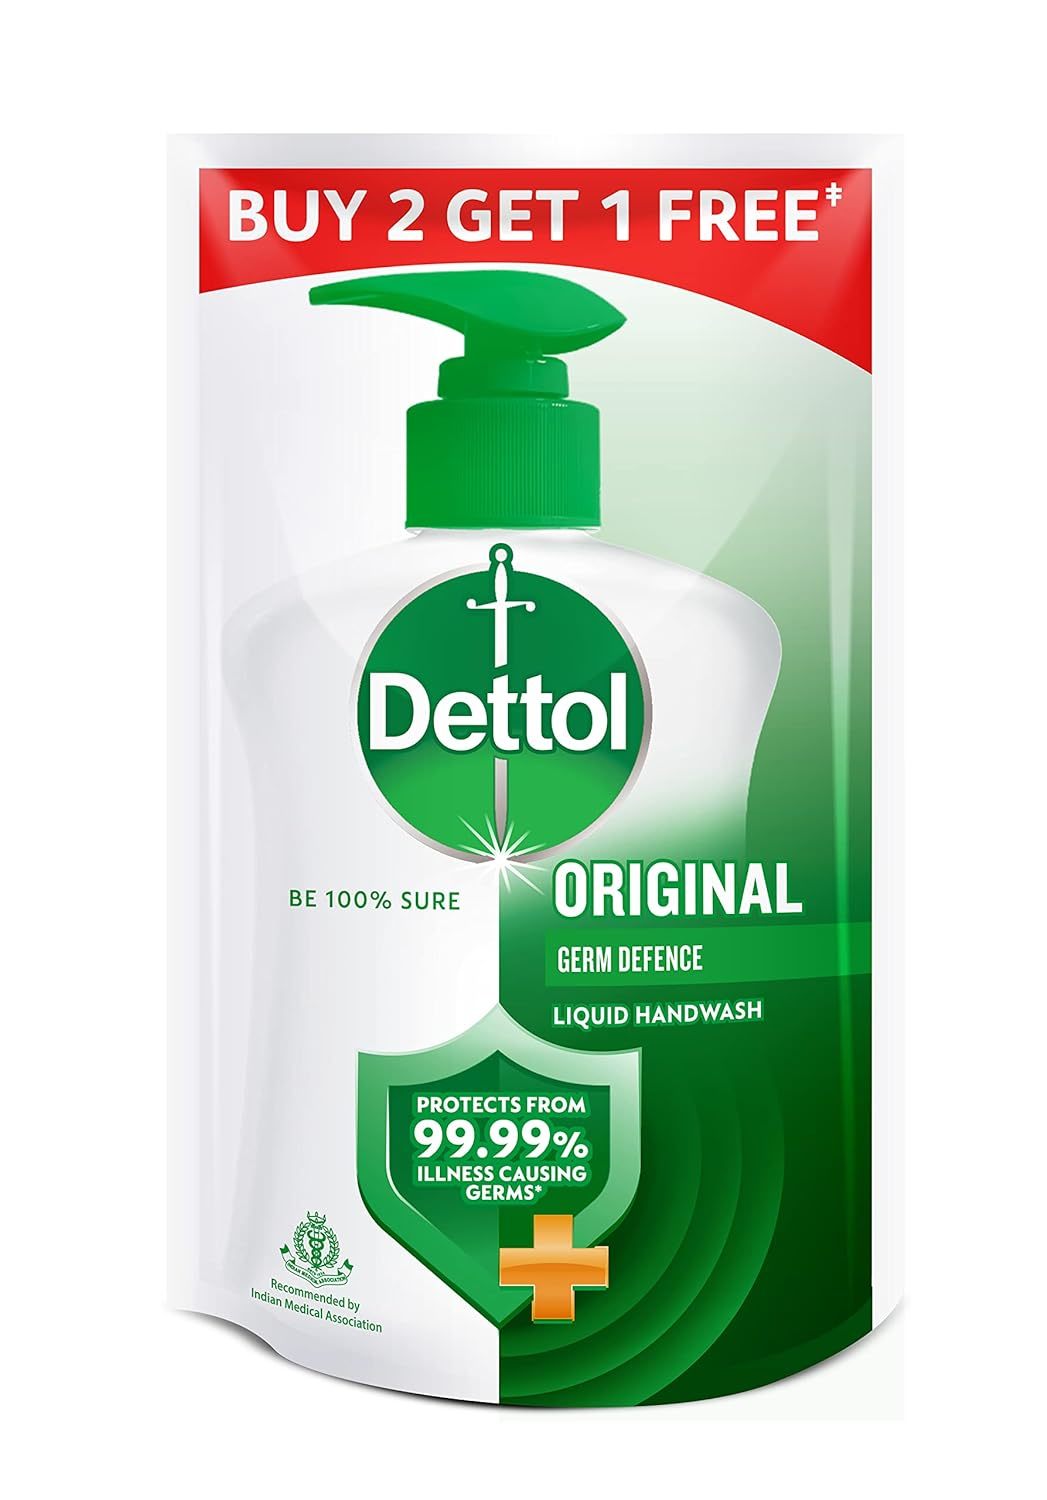 Dettol Liquid Hand Soap 175ml Original Refill (Package May Vary) Pack of 3 - $40.99